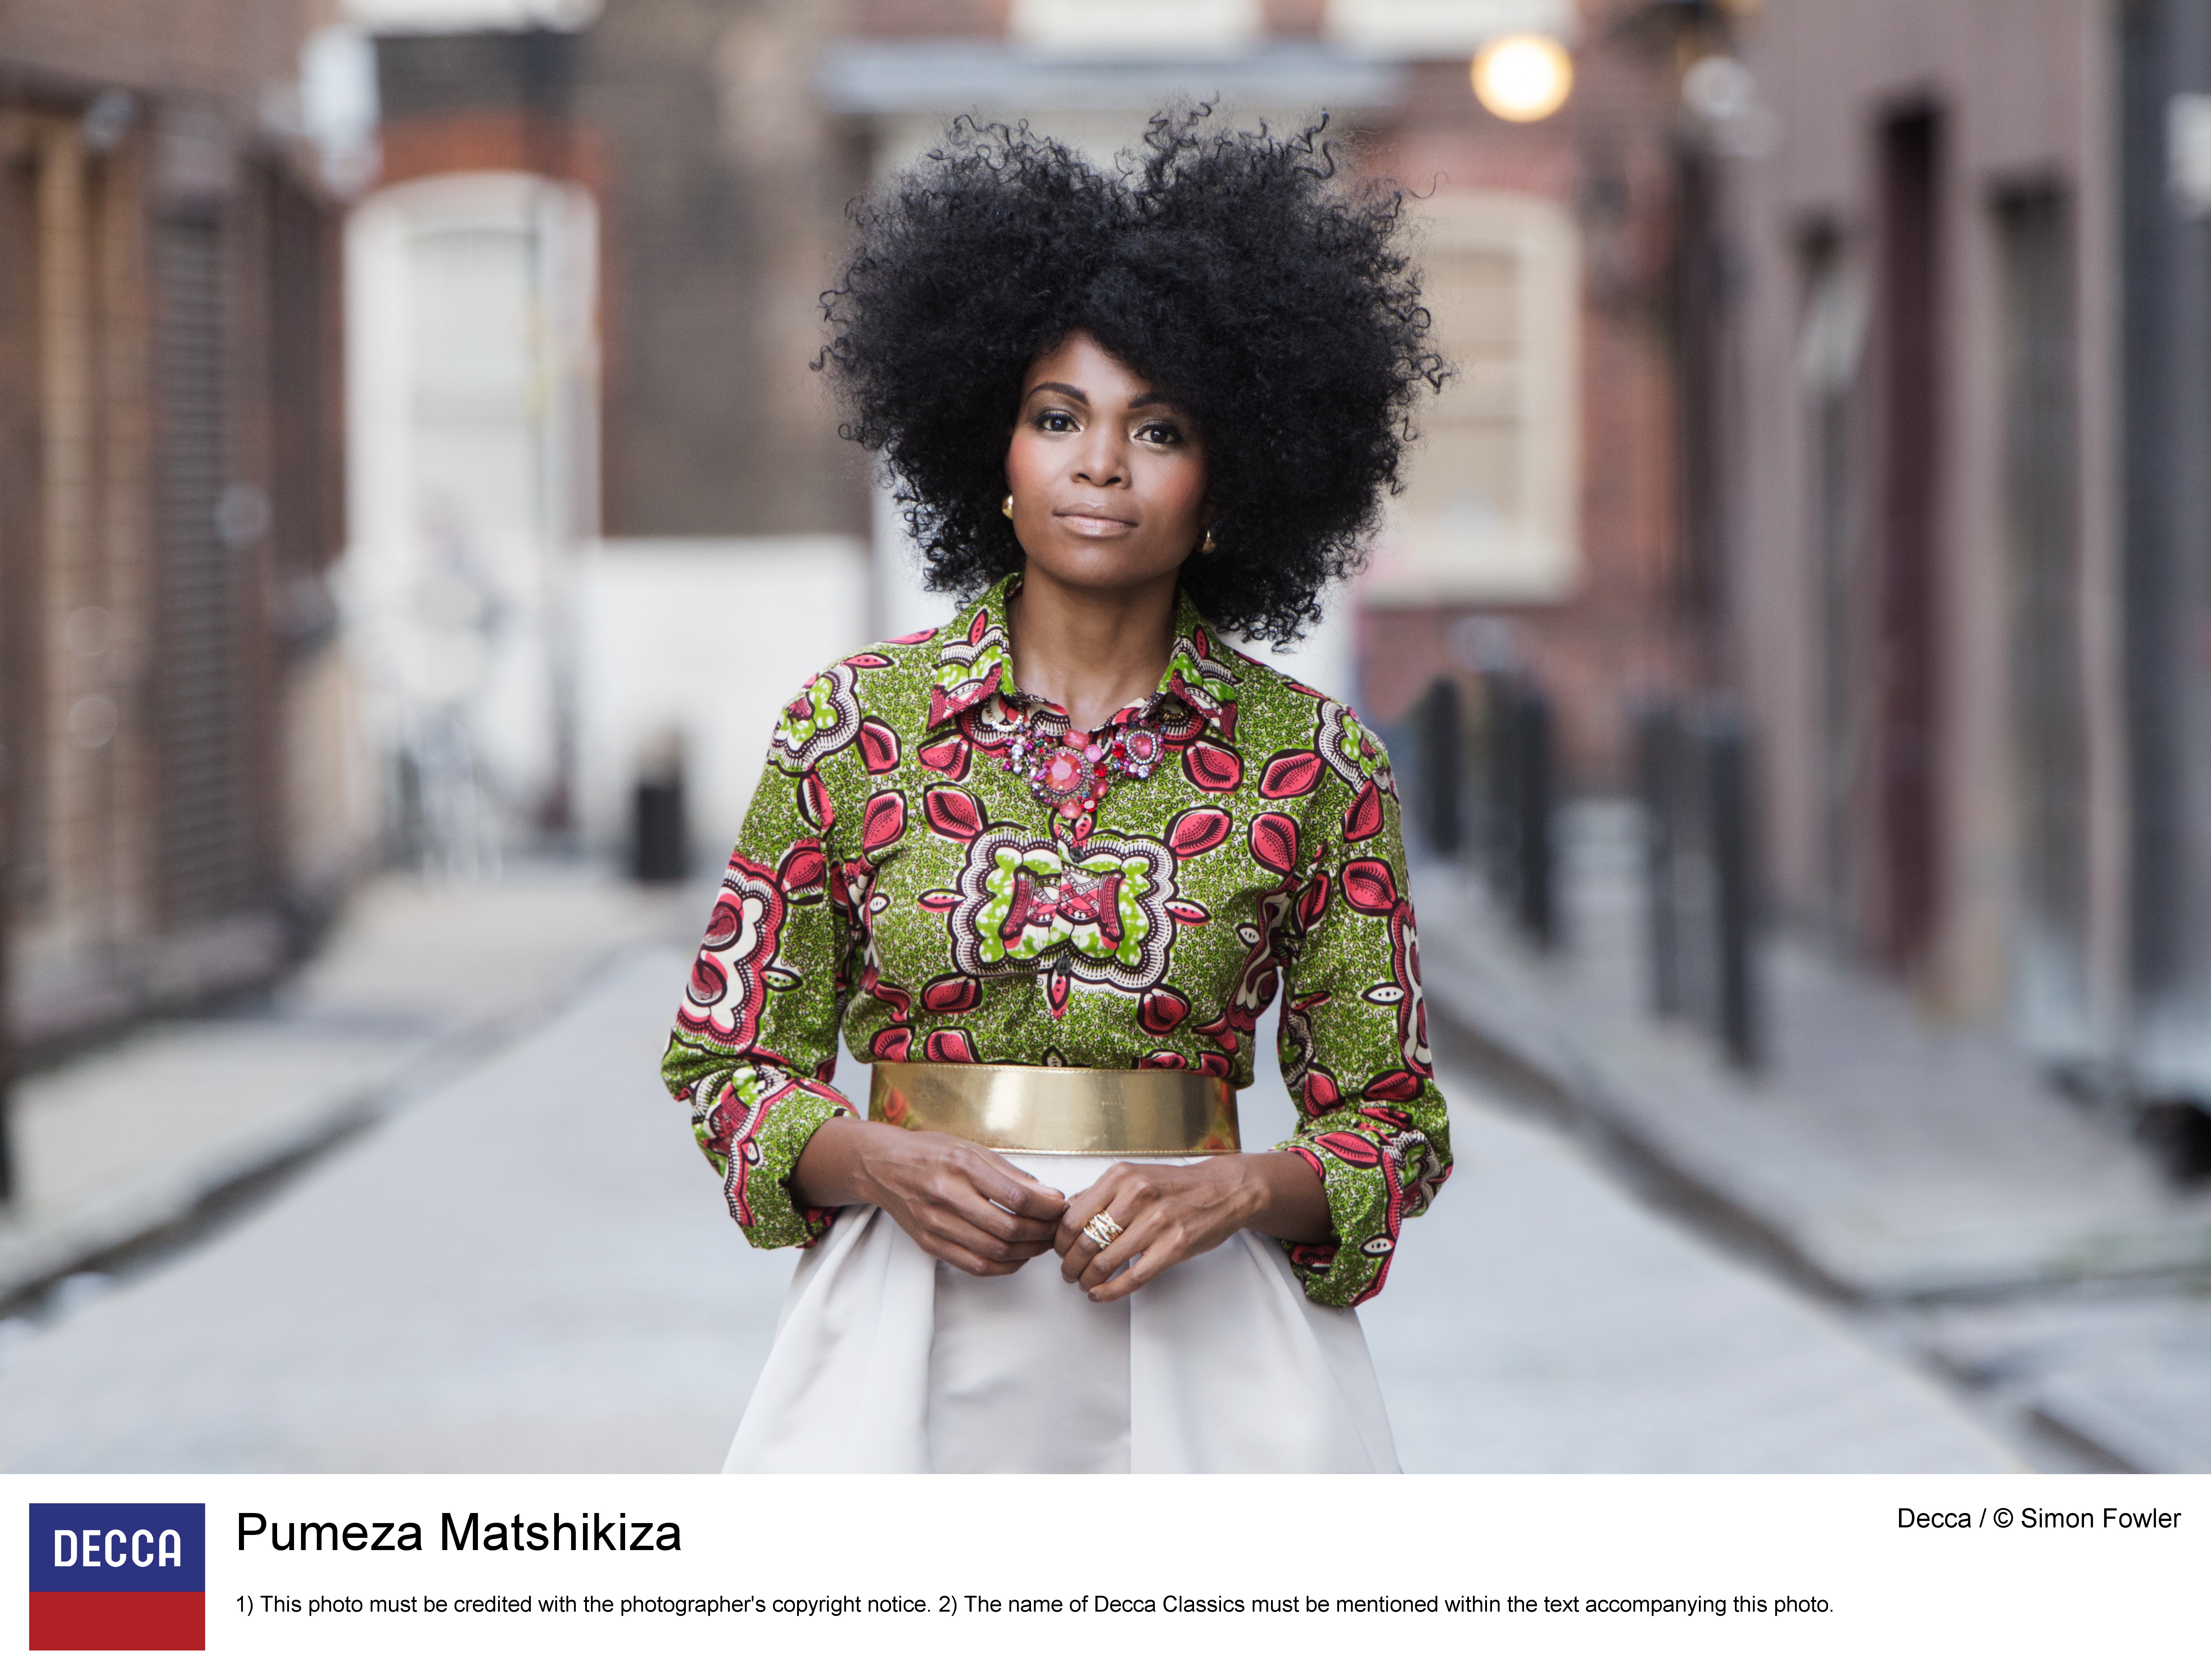 “The Voice Is Number One” – Pumeza Matshikiza On Her Life As An Opera Singer